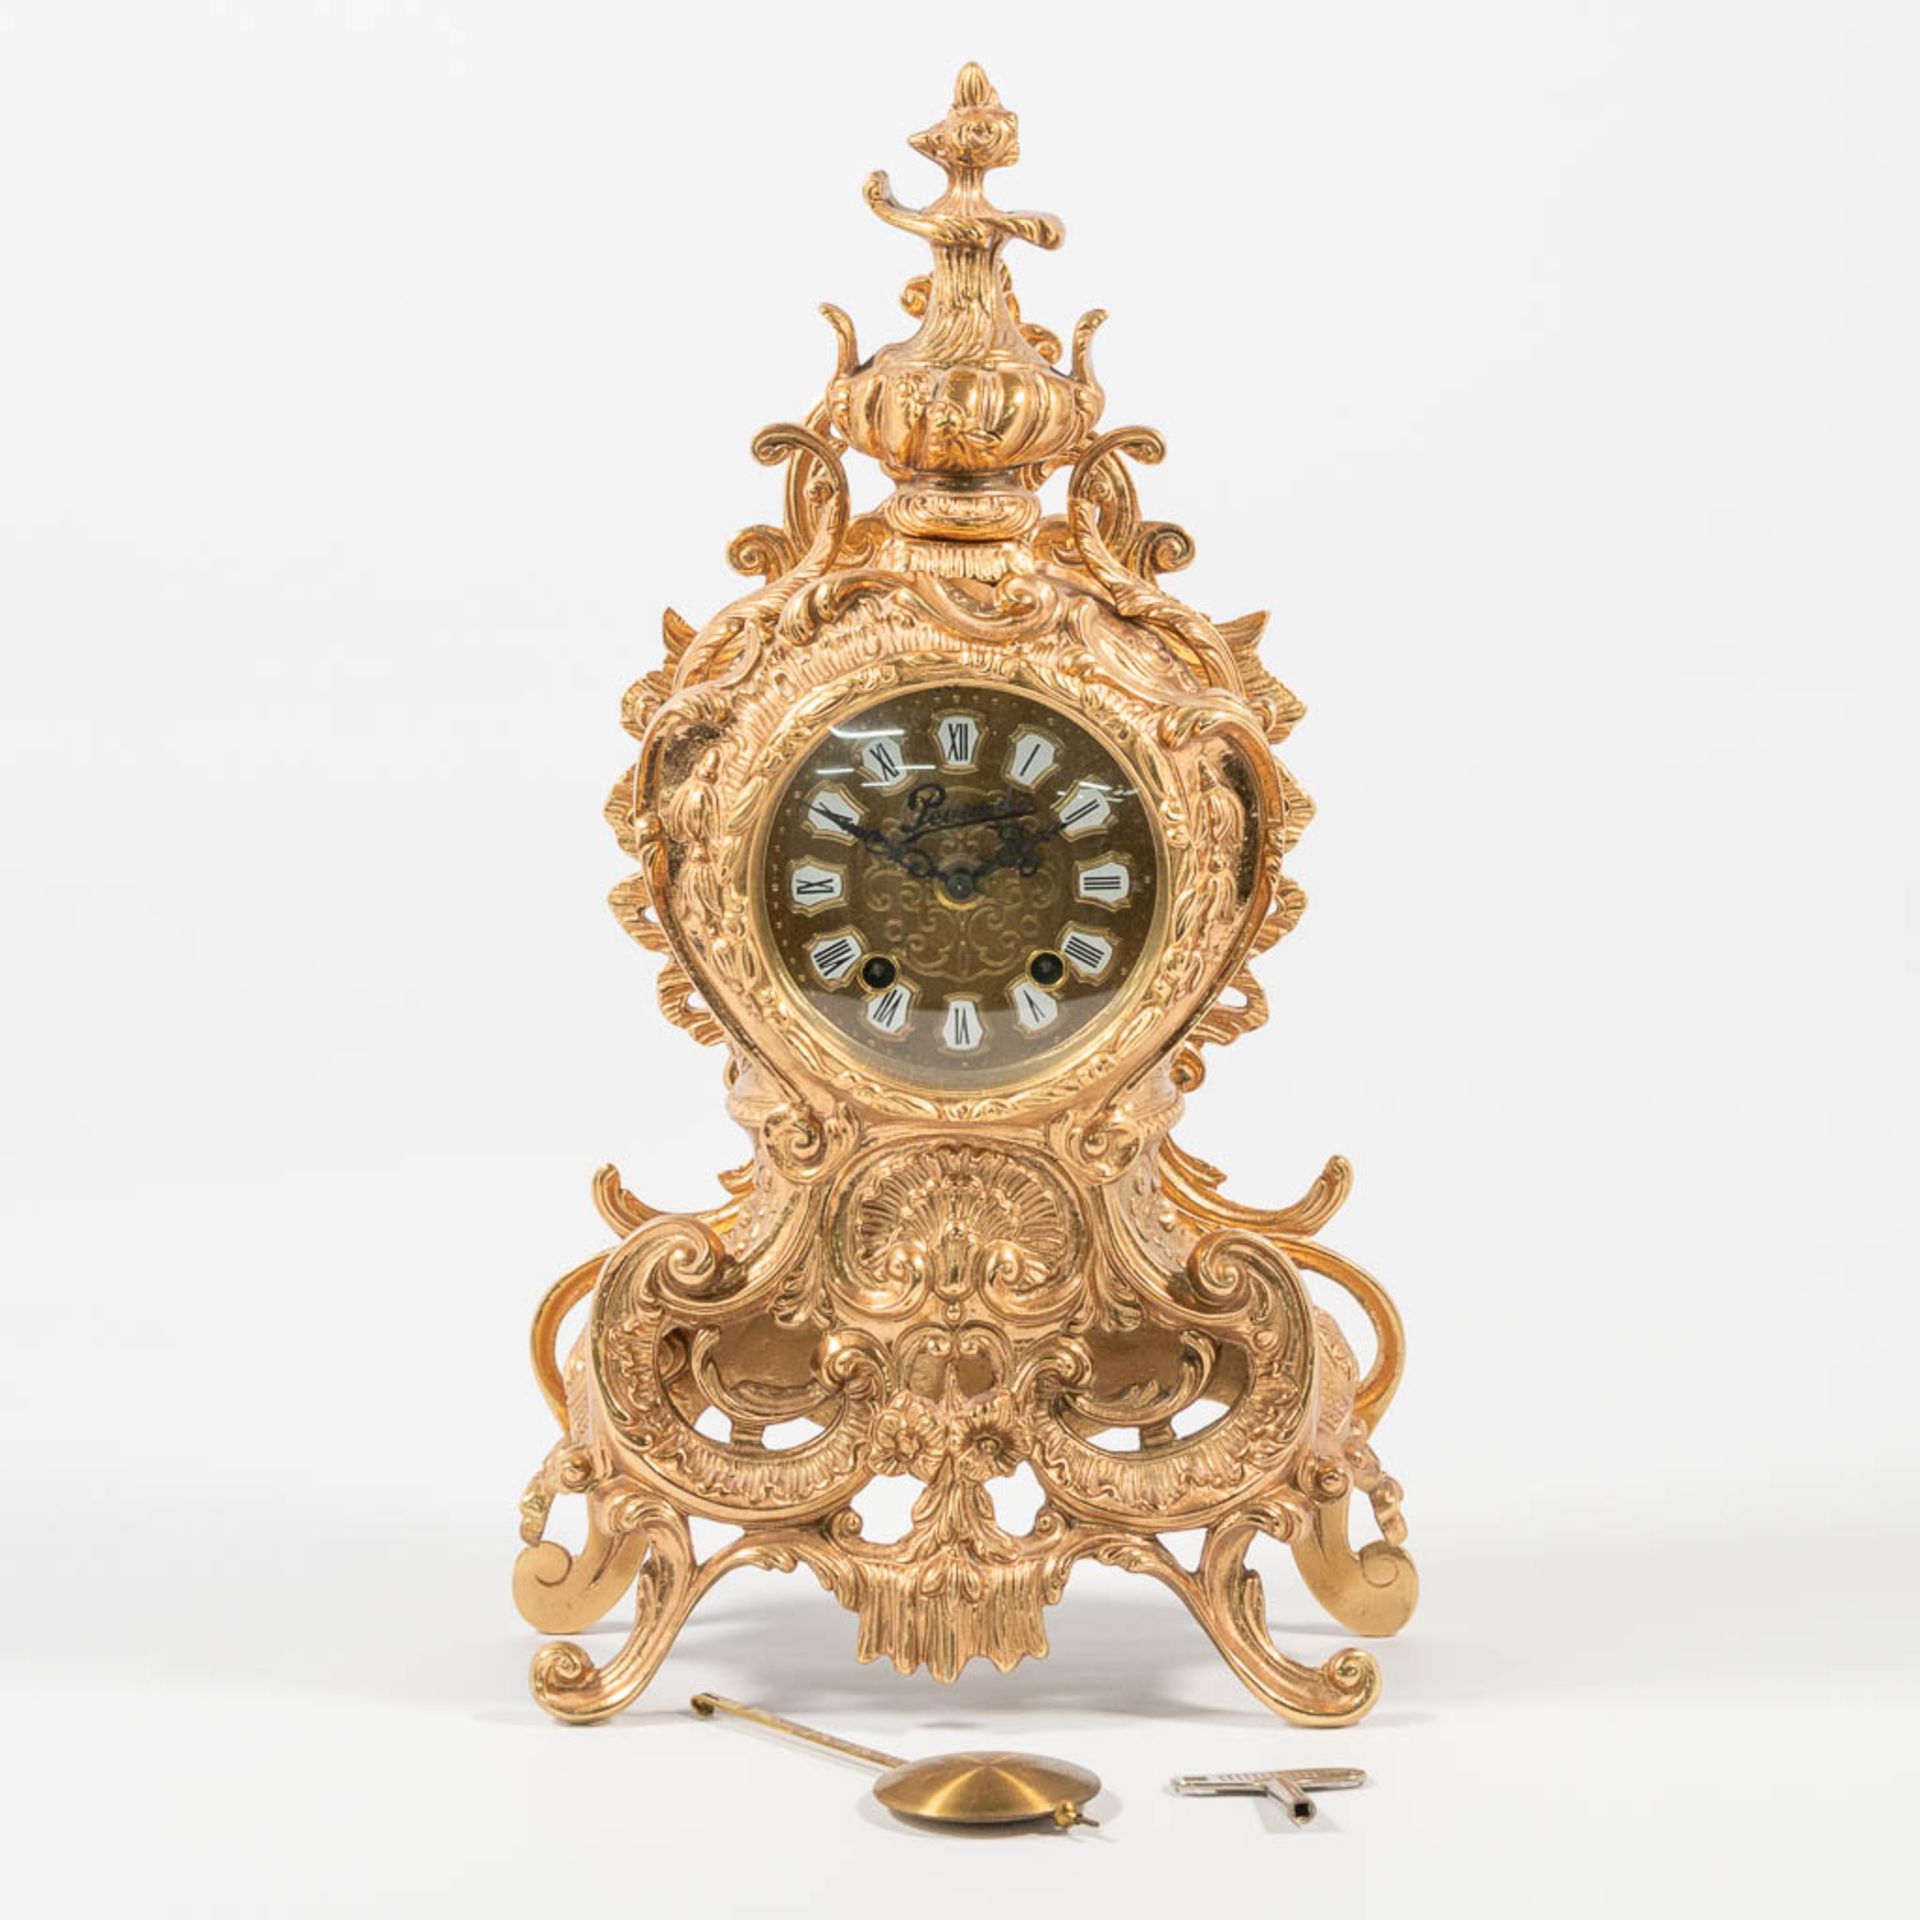 A vintage bronze clock 'Pevanda' with mechanical movement, made around 1970.